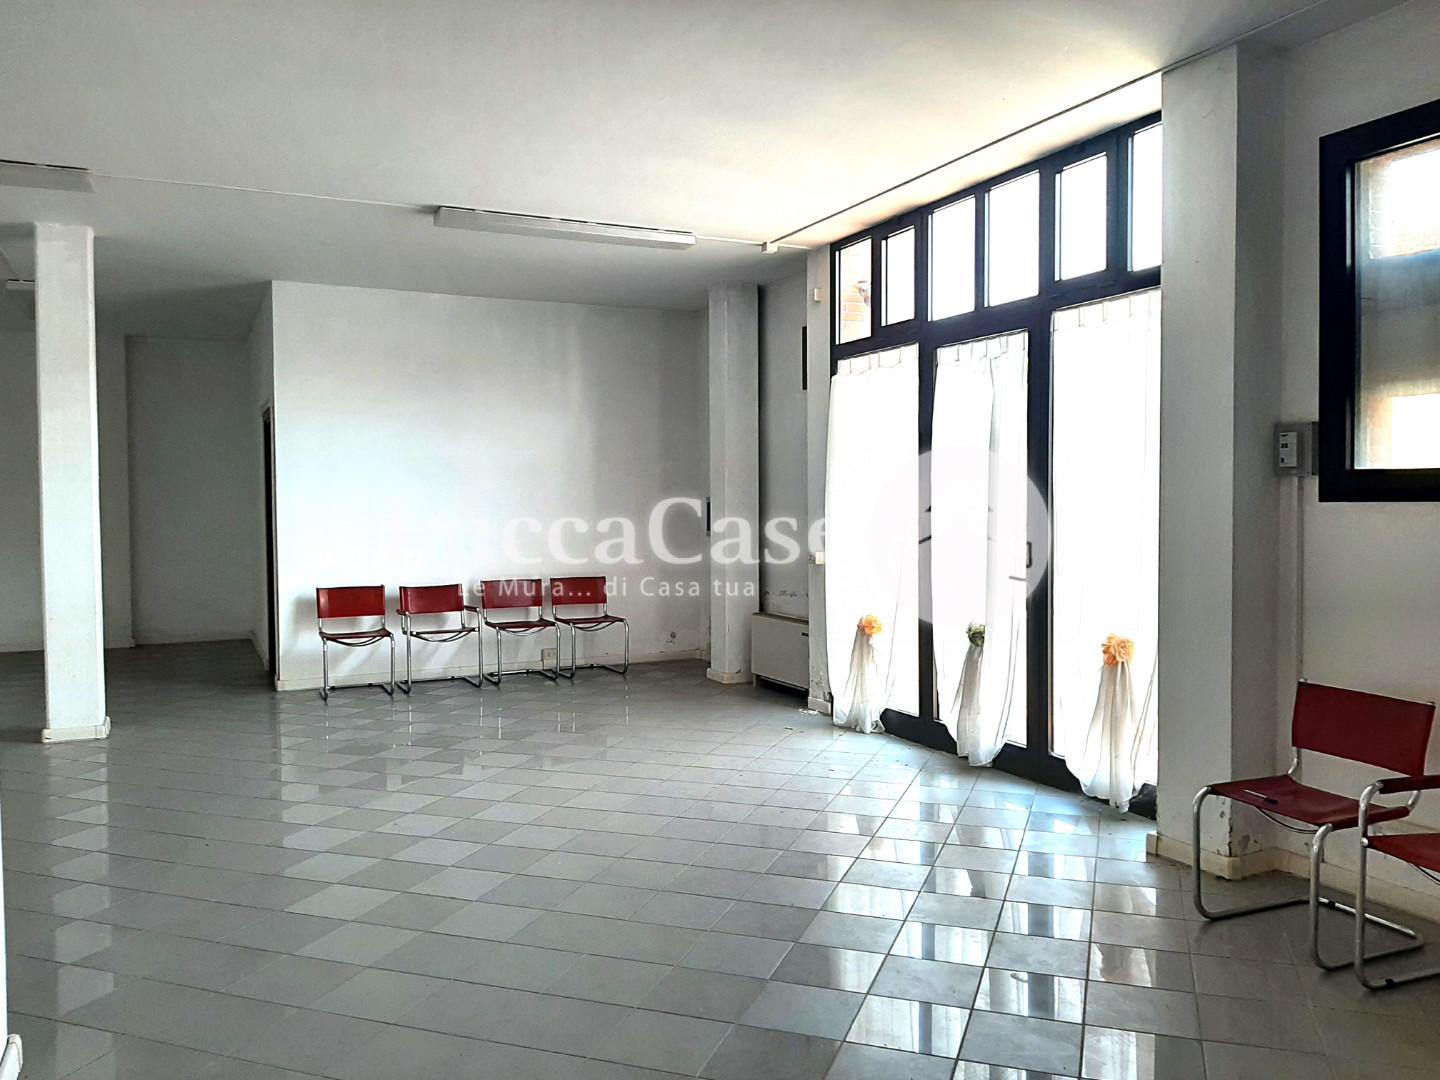 Office for commercial rentals, ref. F065K